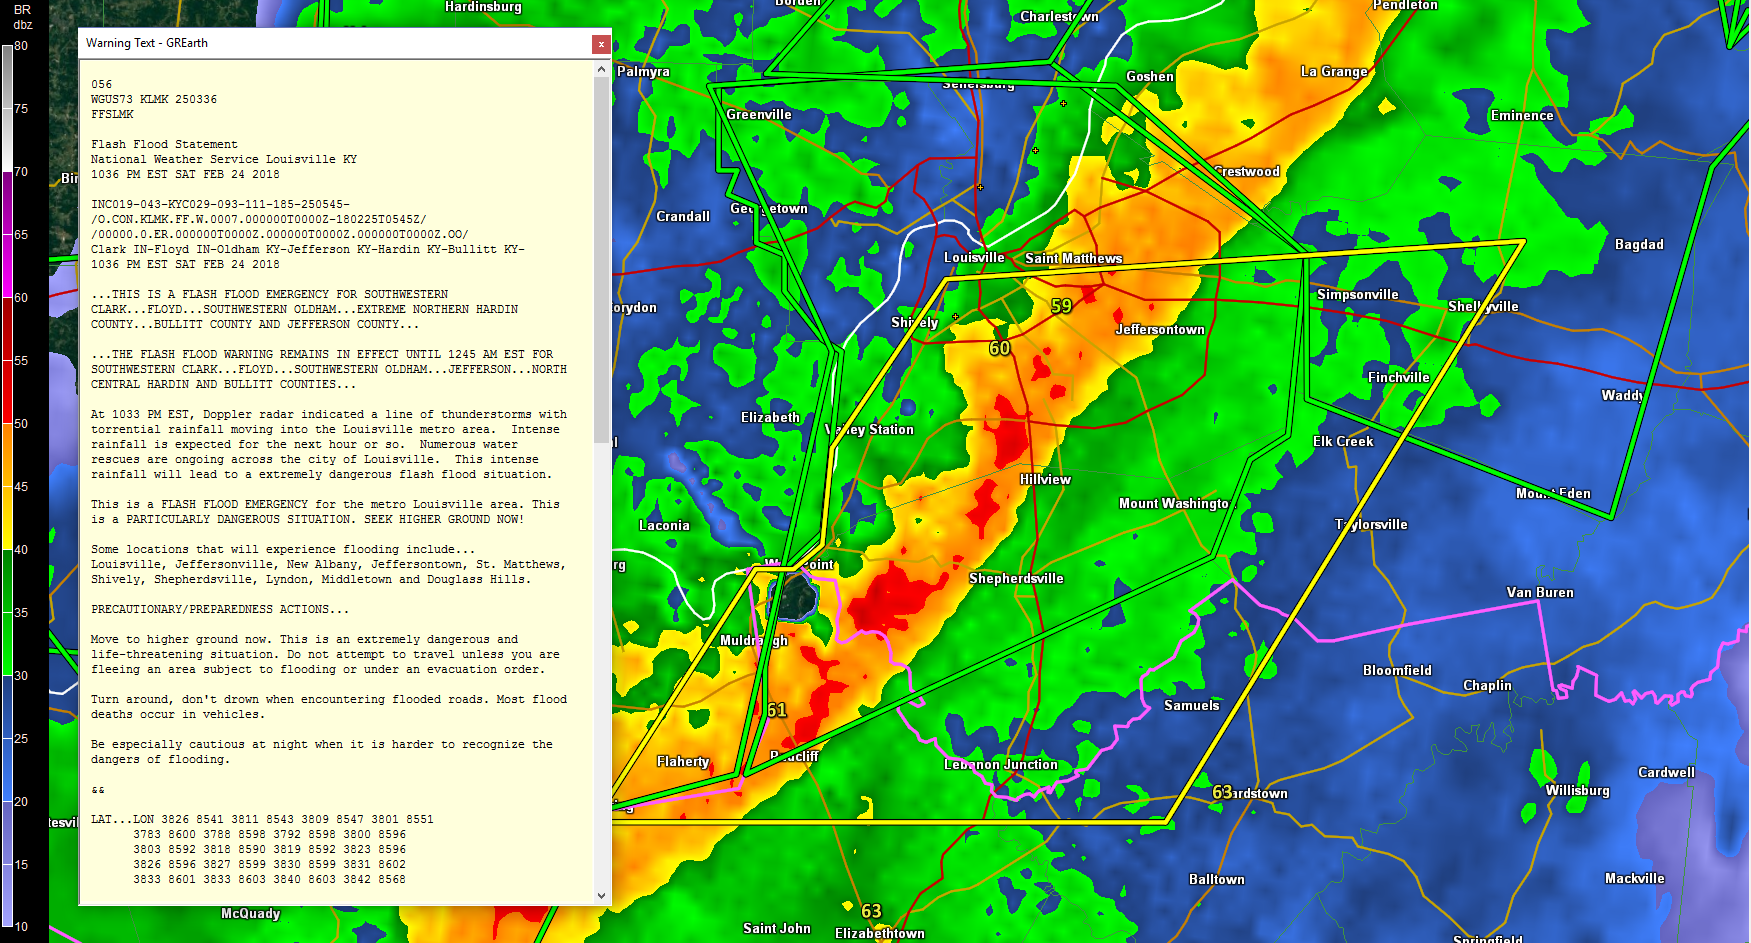 Flash Flood Emergency for the Louisville Metro : The Alabama Weather Blog